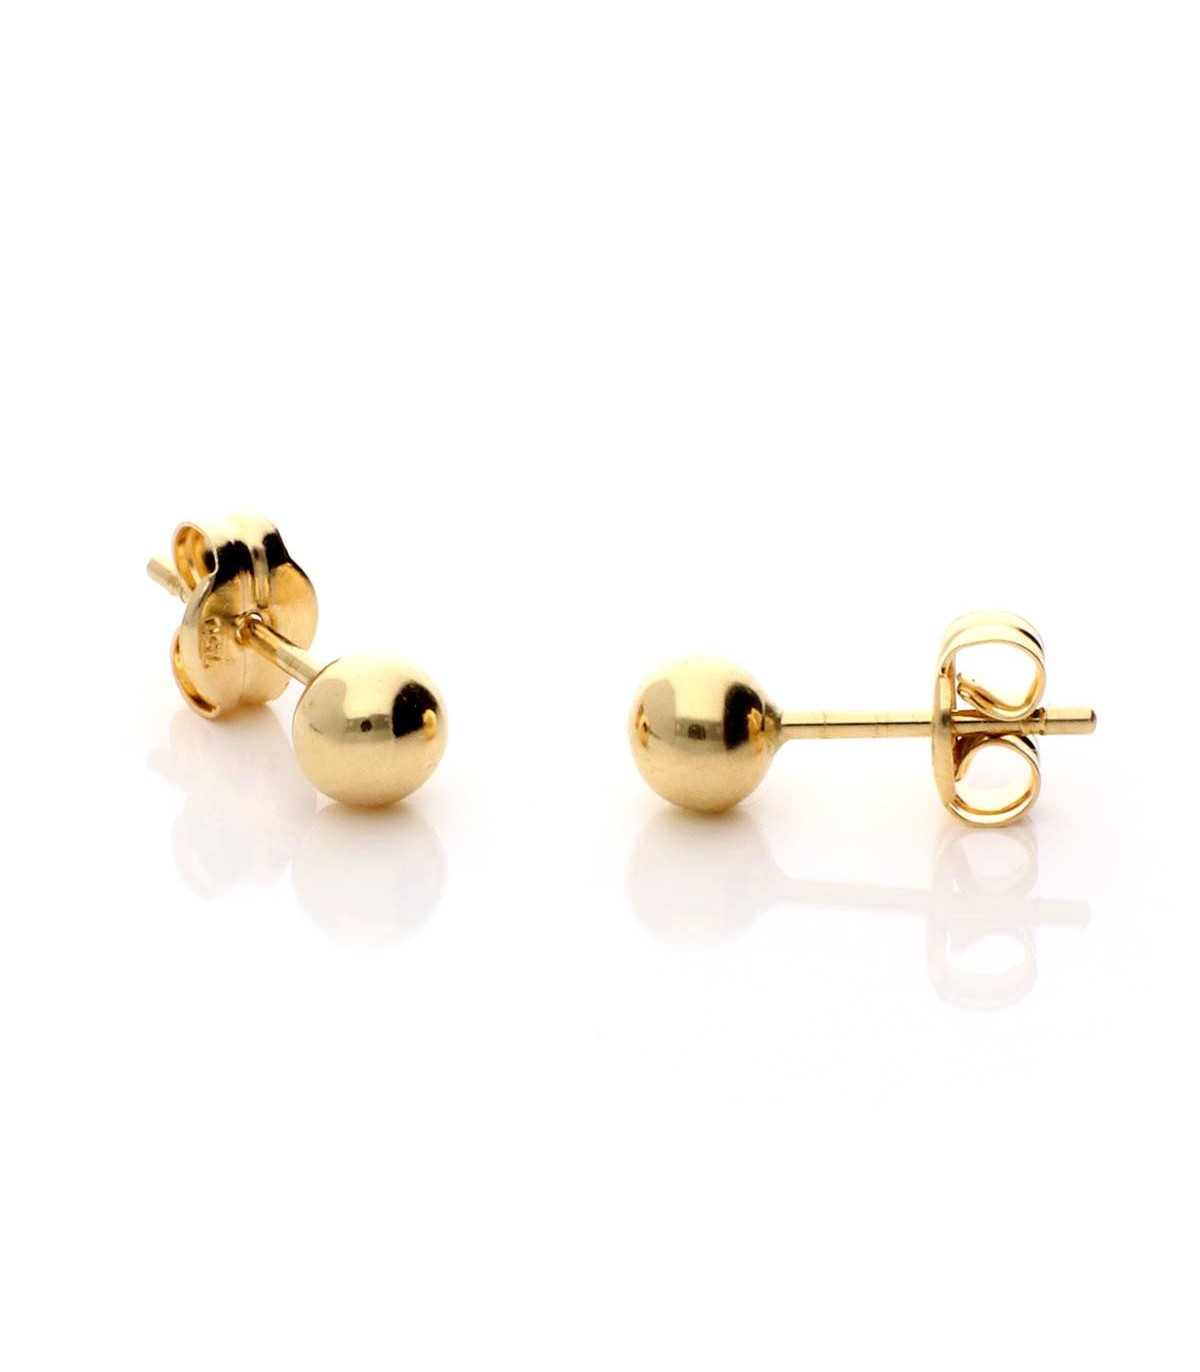 Buy 14k Yellow Gold Ball Stud Earrings with Secure Screw-backs (5mm) at  Amazon.in